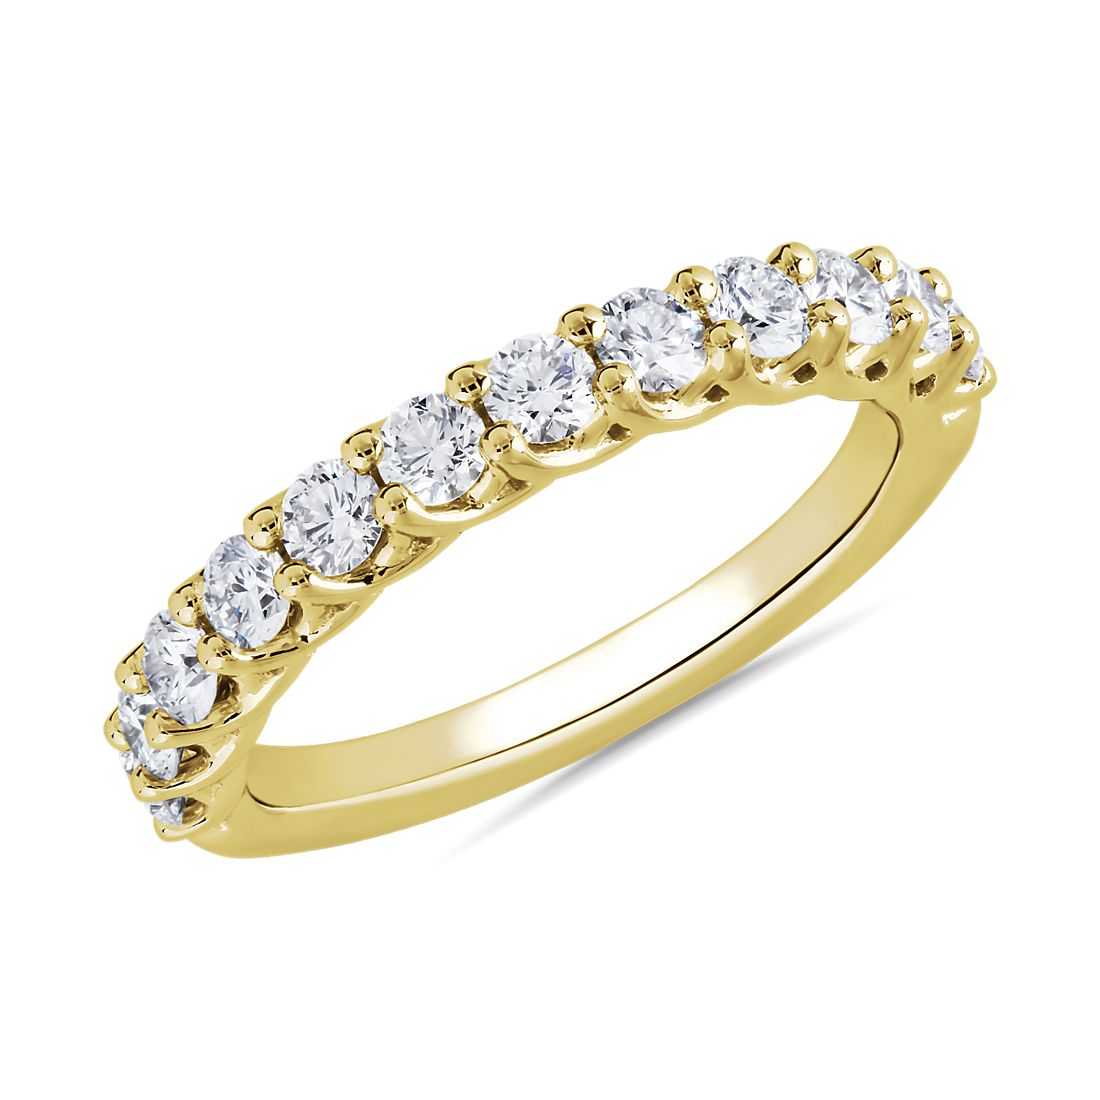 Tessere Weave Diamond Anniversary Band in 14k Yellow Gold (0.96 ct. tw.)